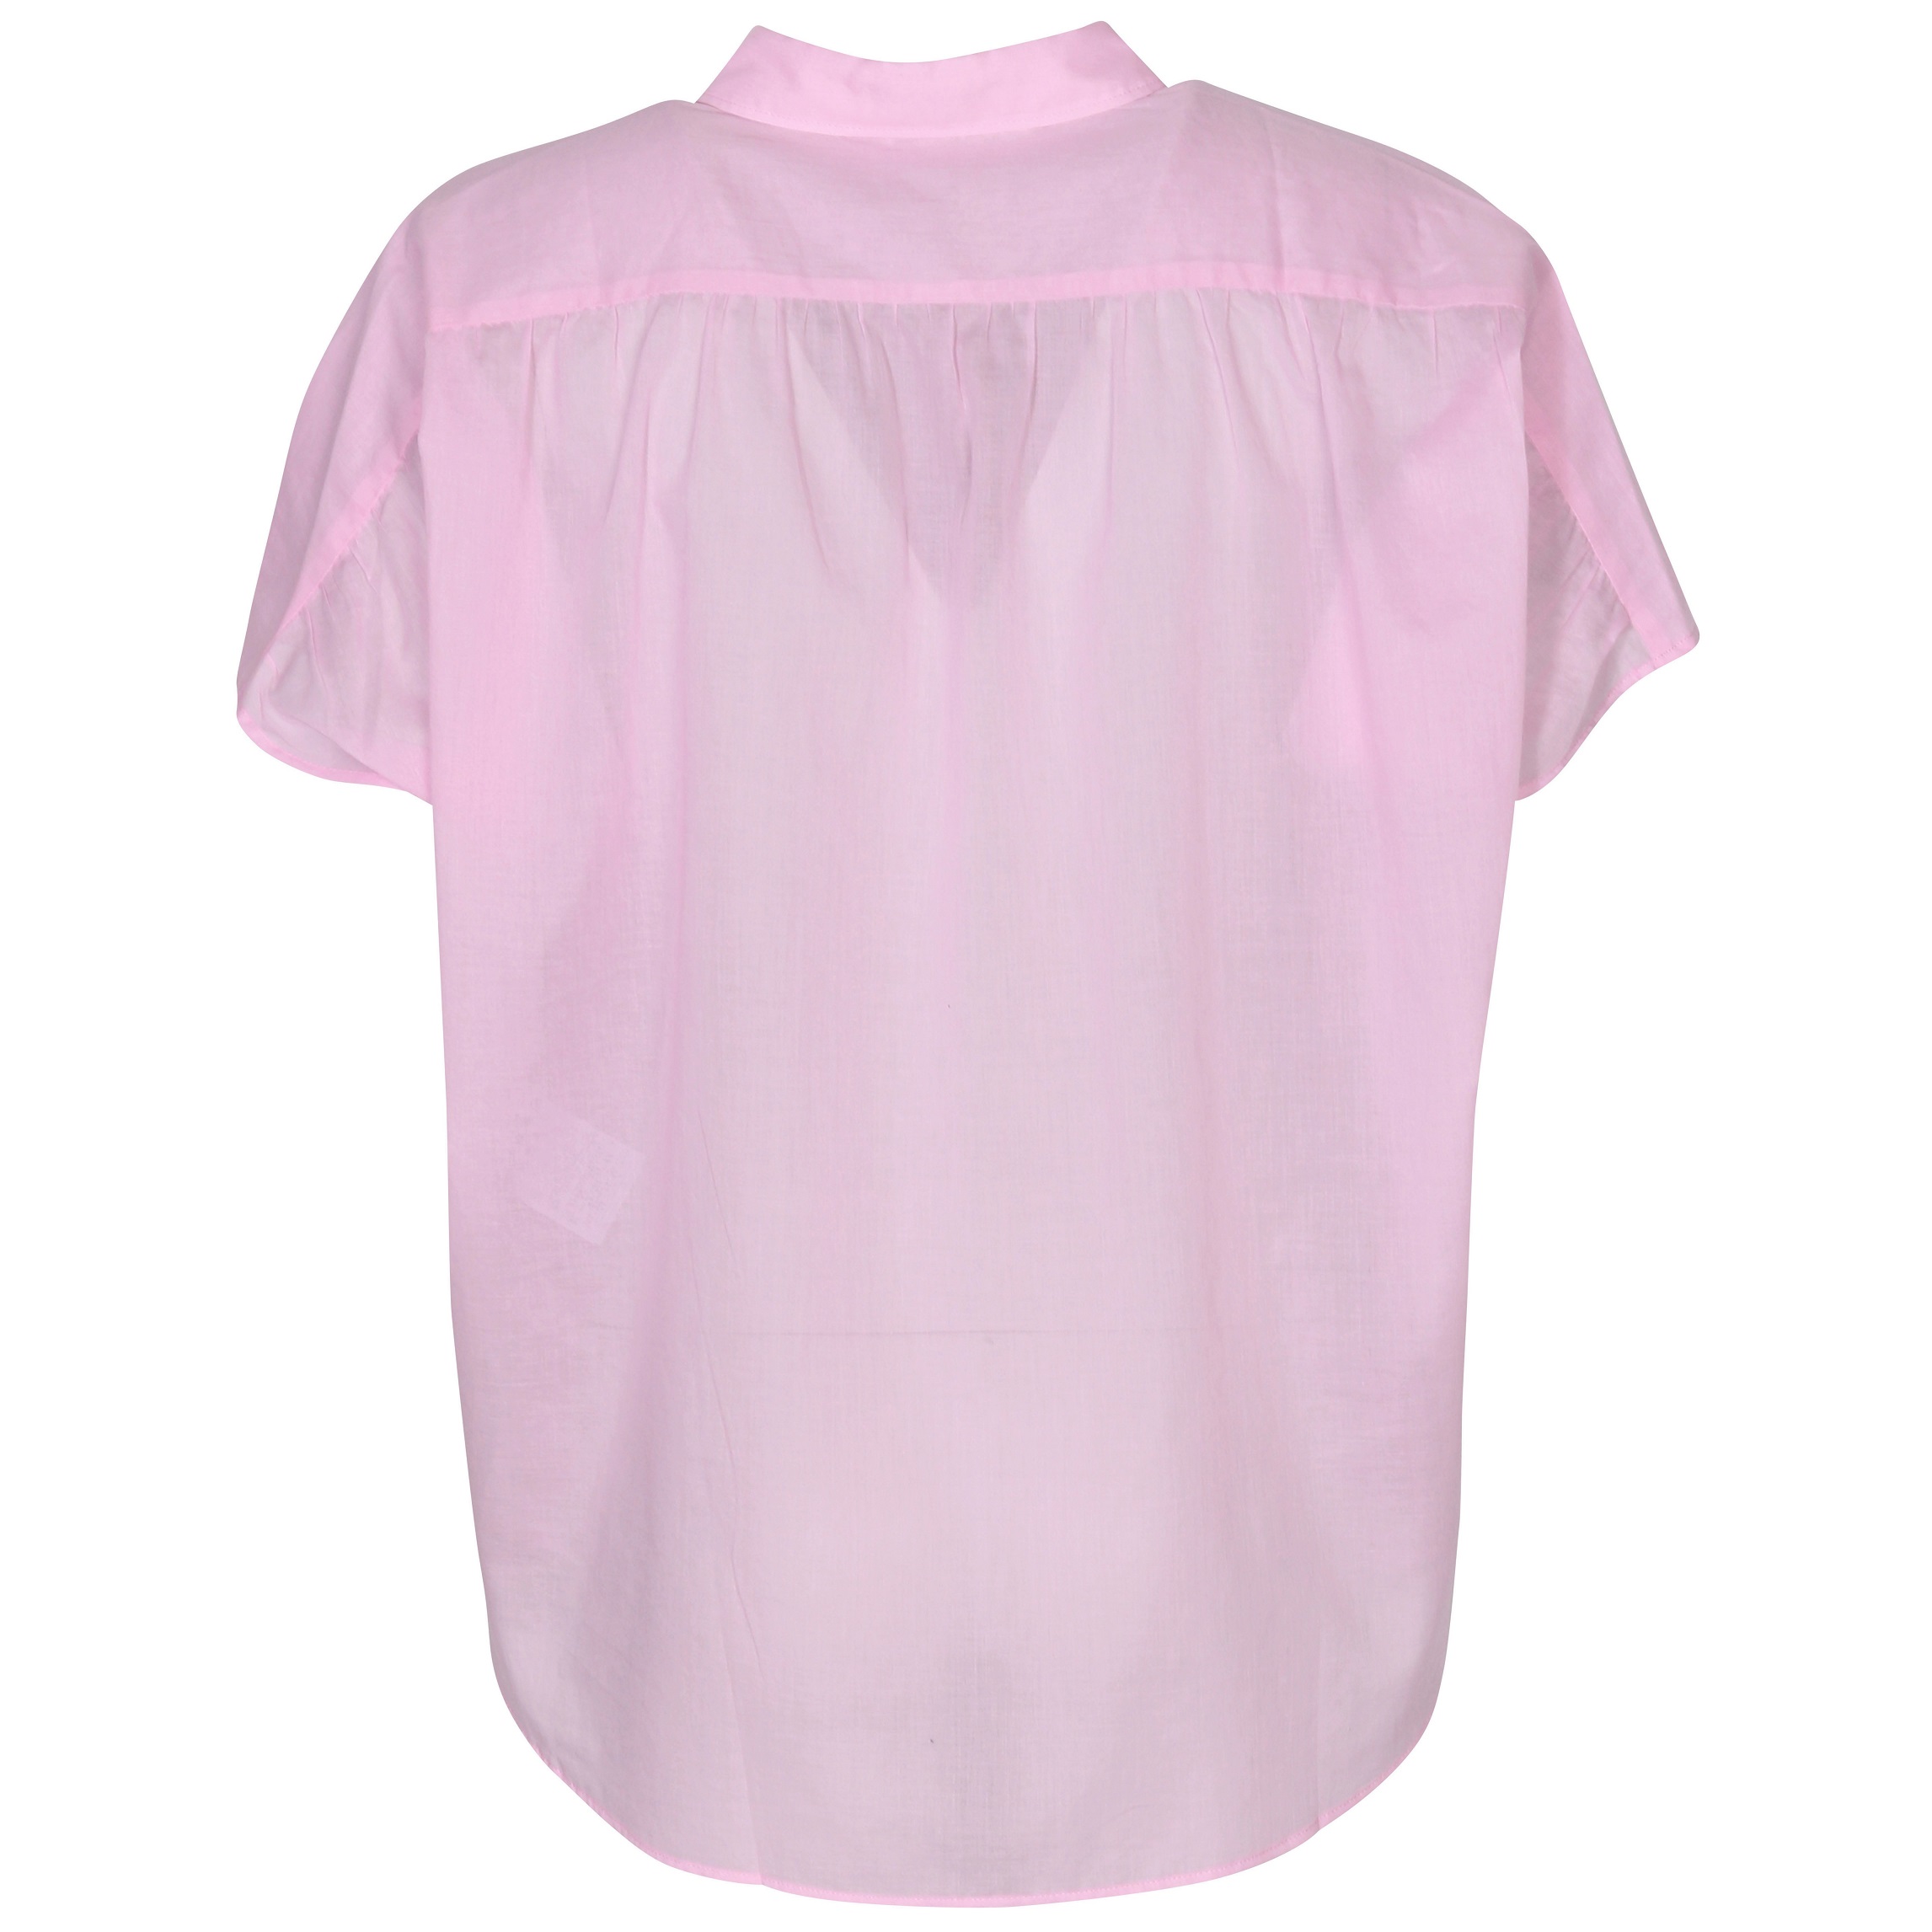 CLOSED Gathered Shirt in Pink